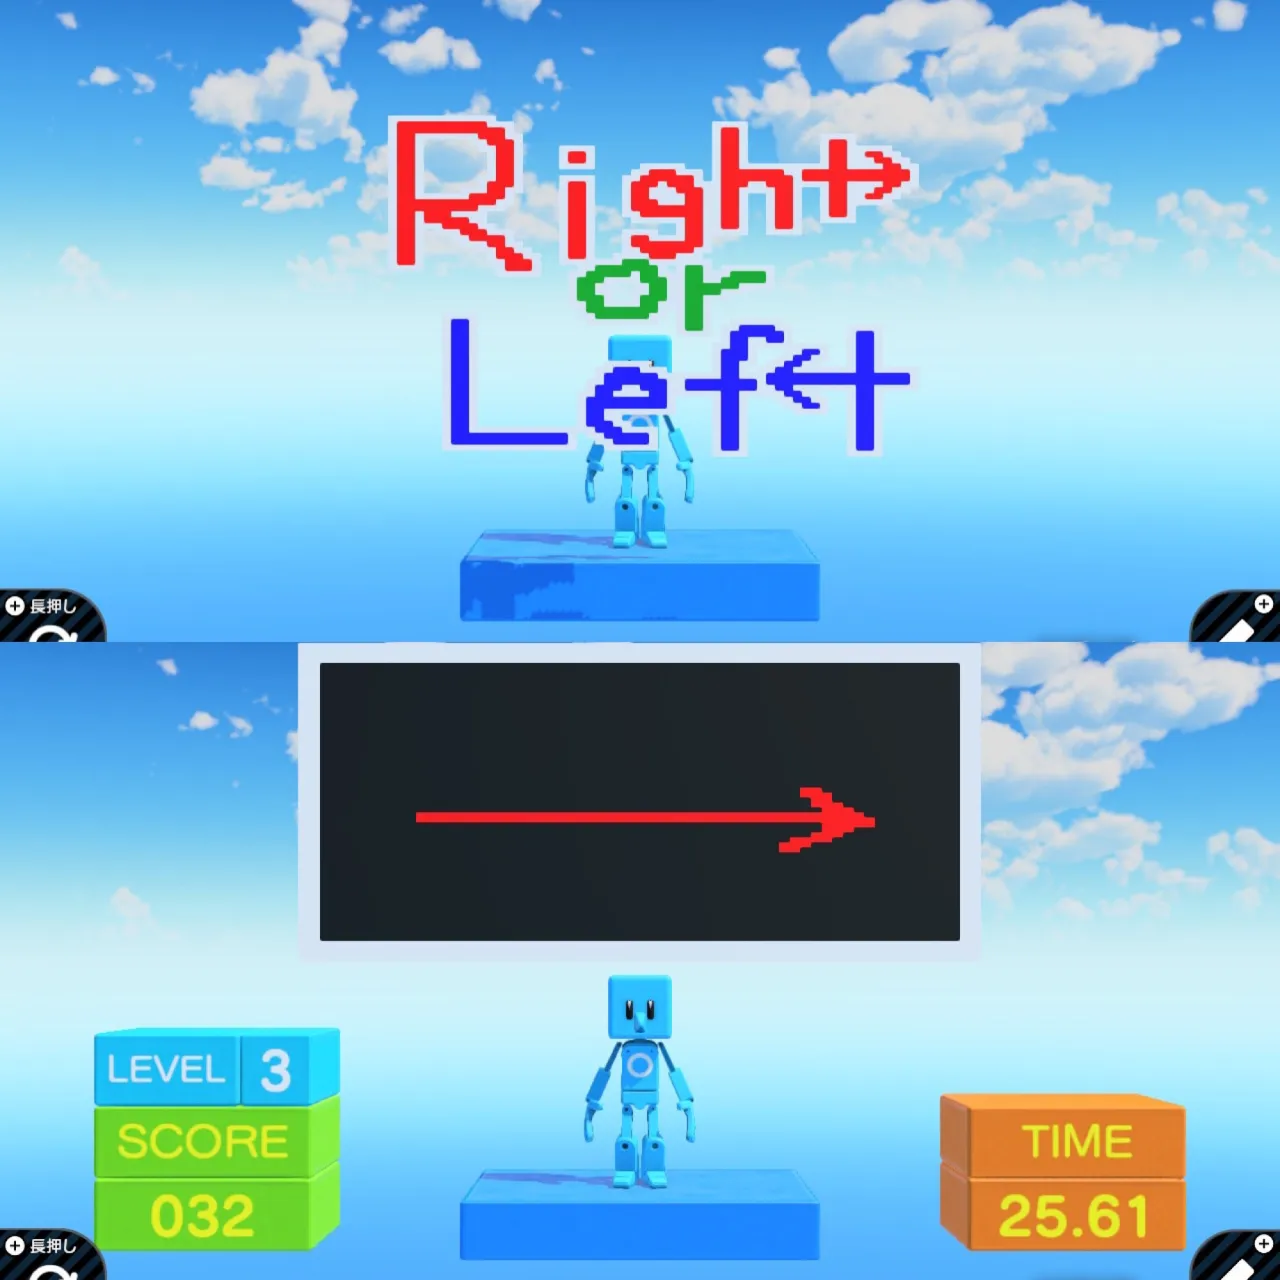 Right or Left